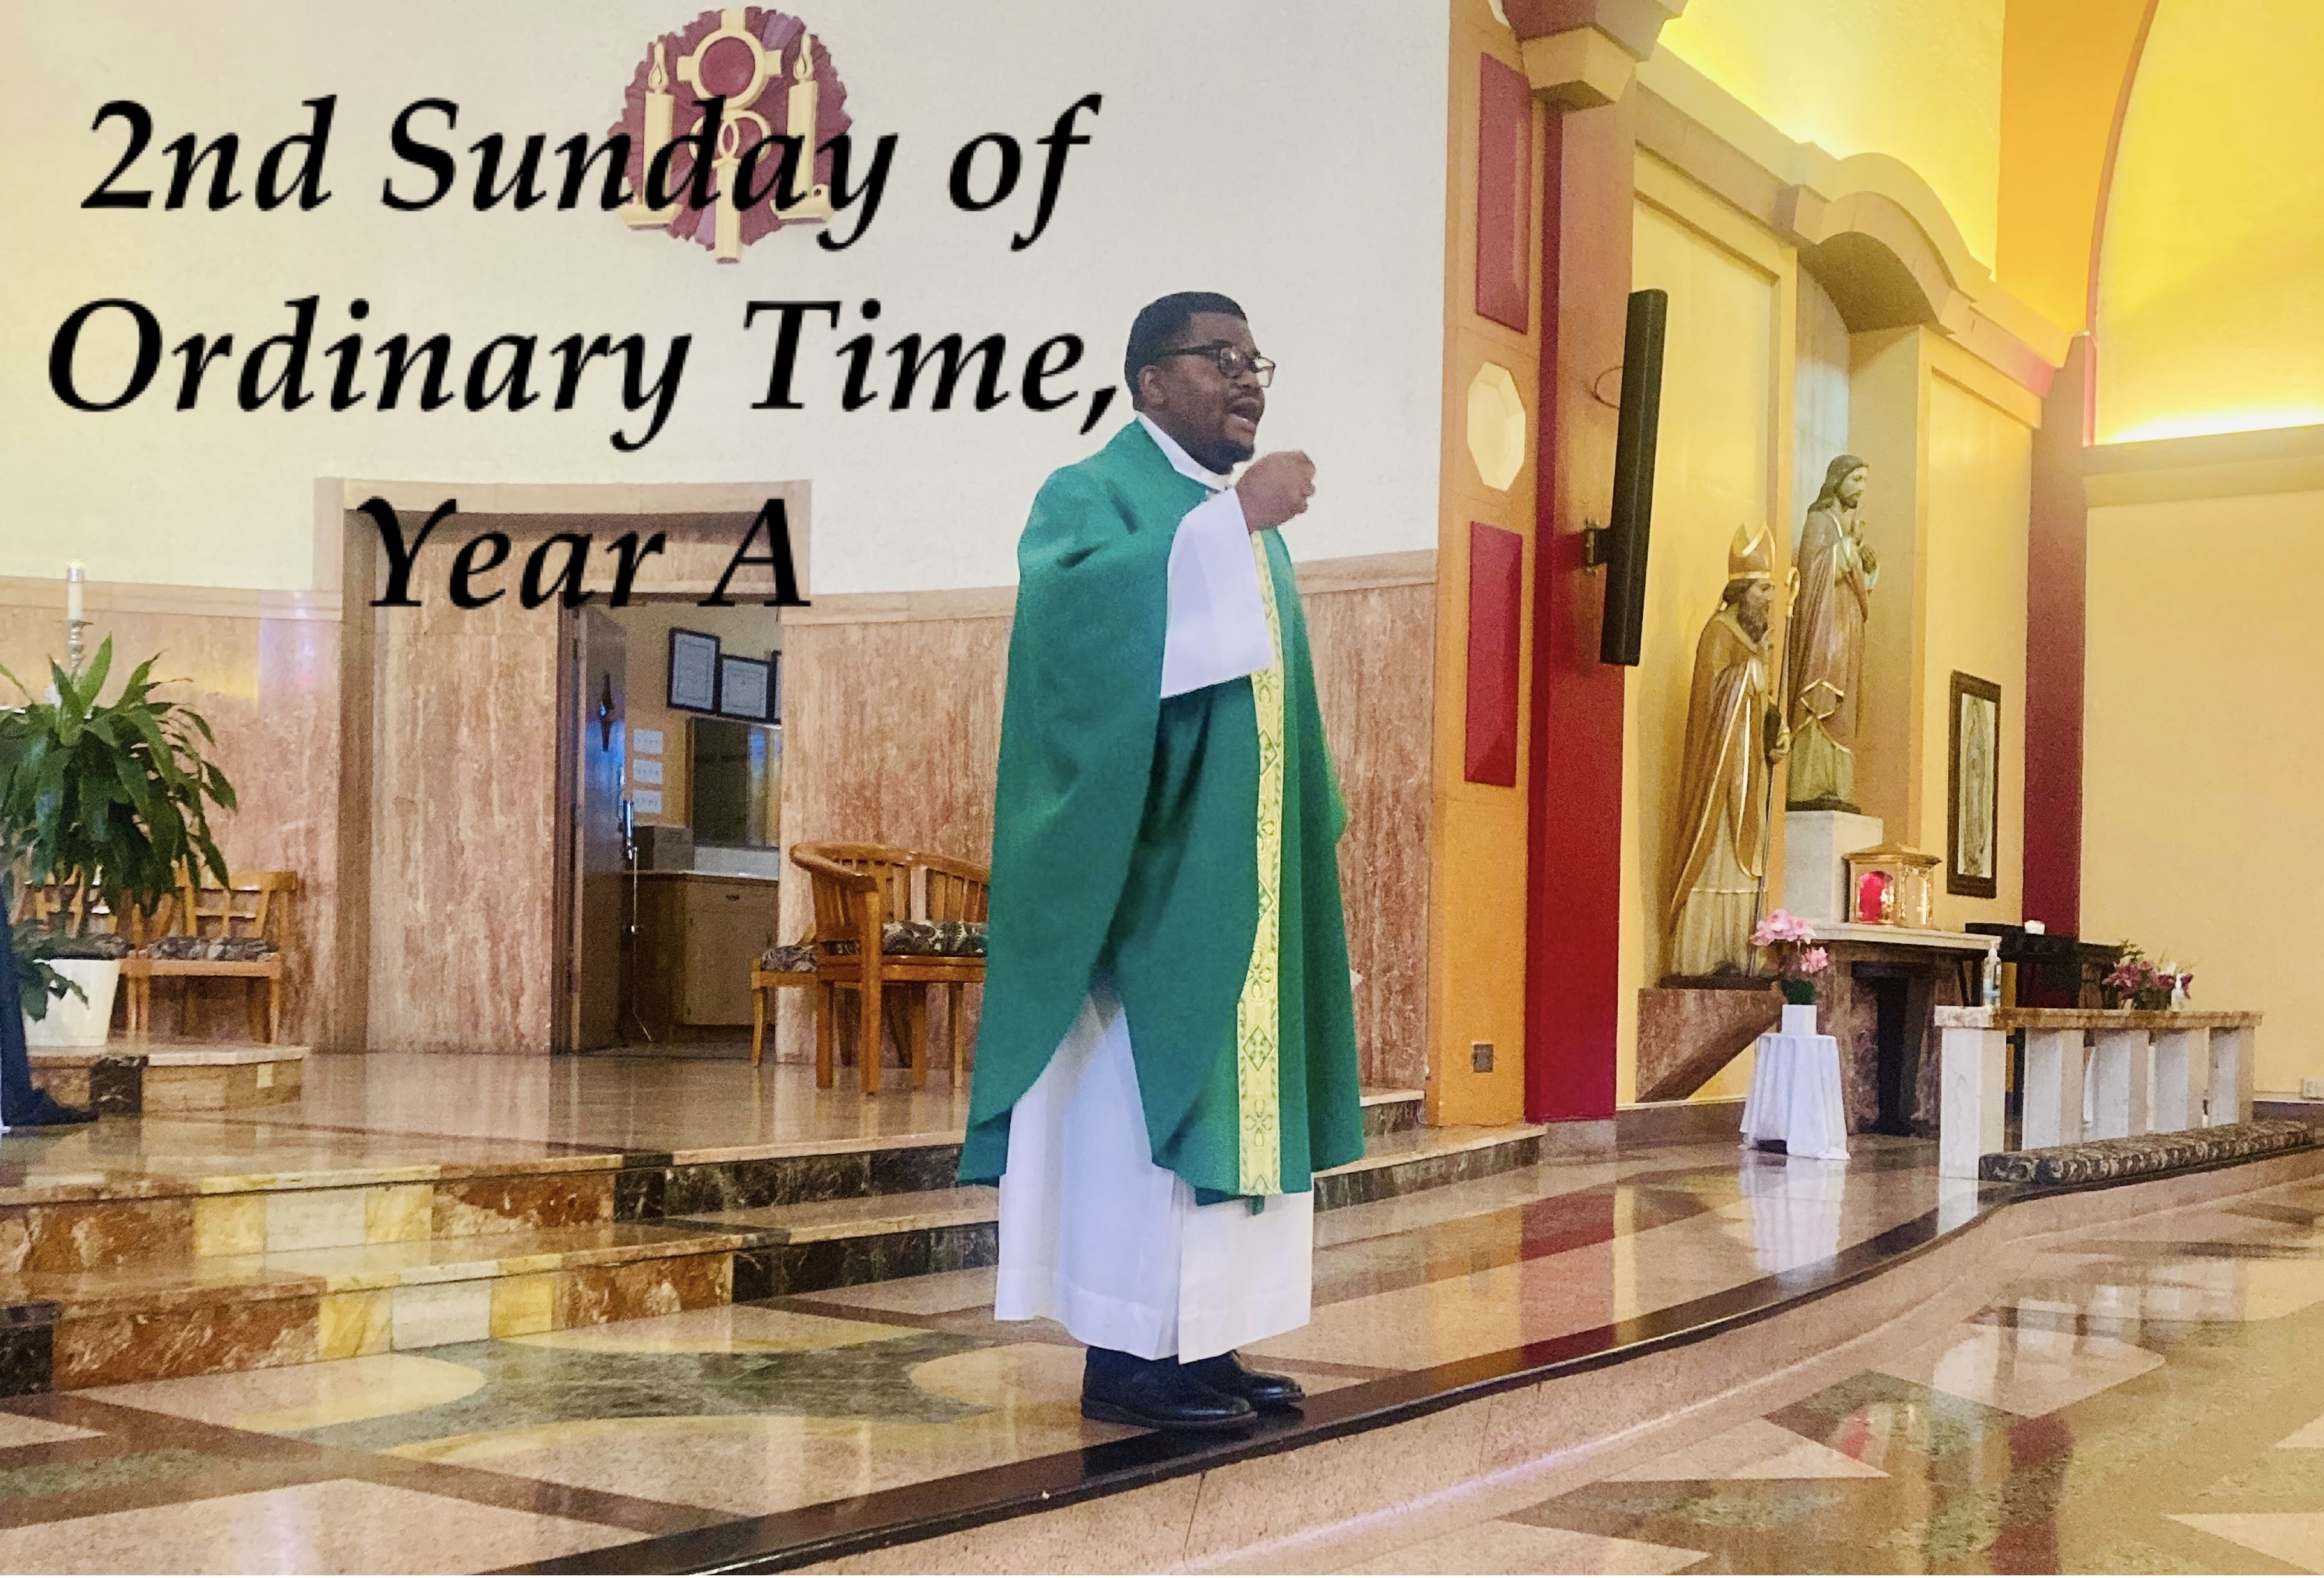 2nd Sunday of Ordinary Time, Year A